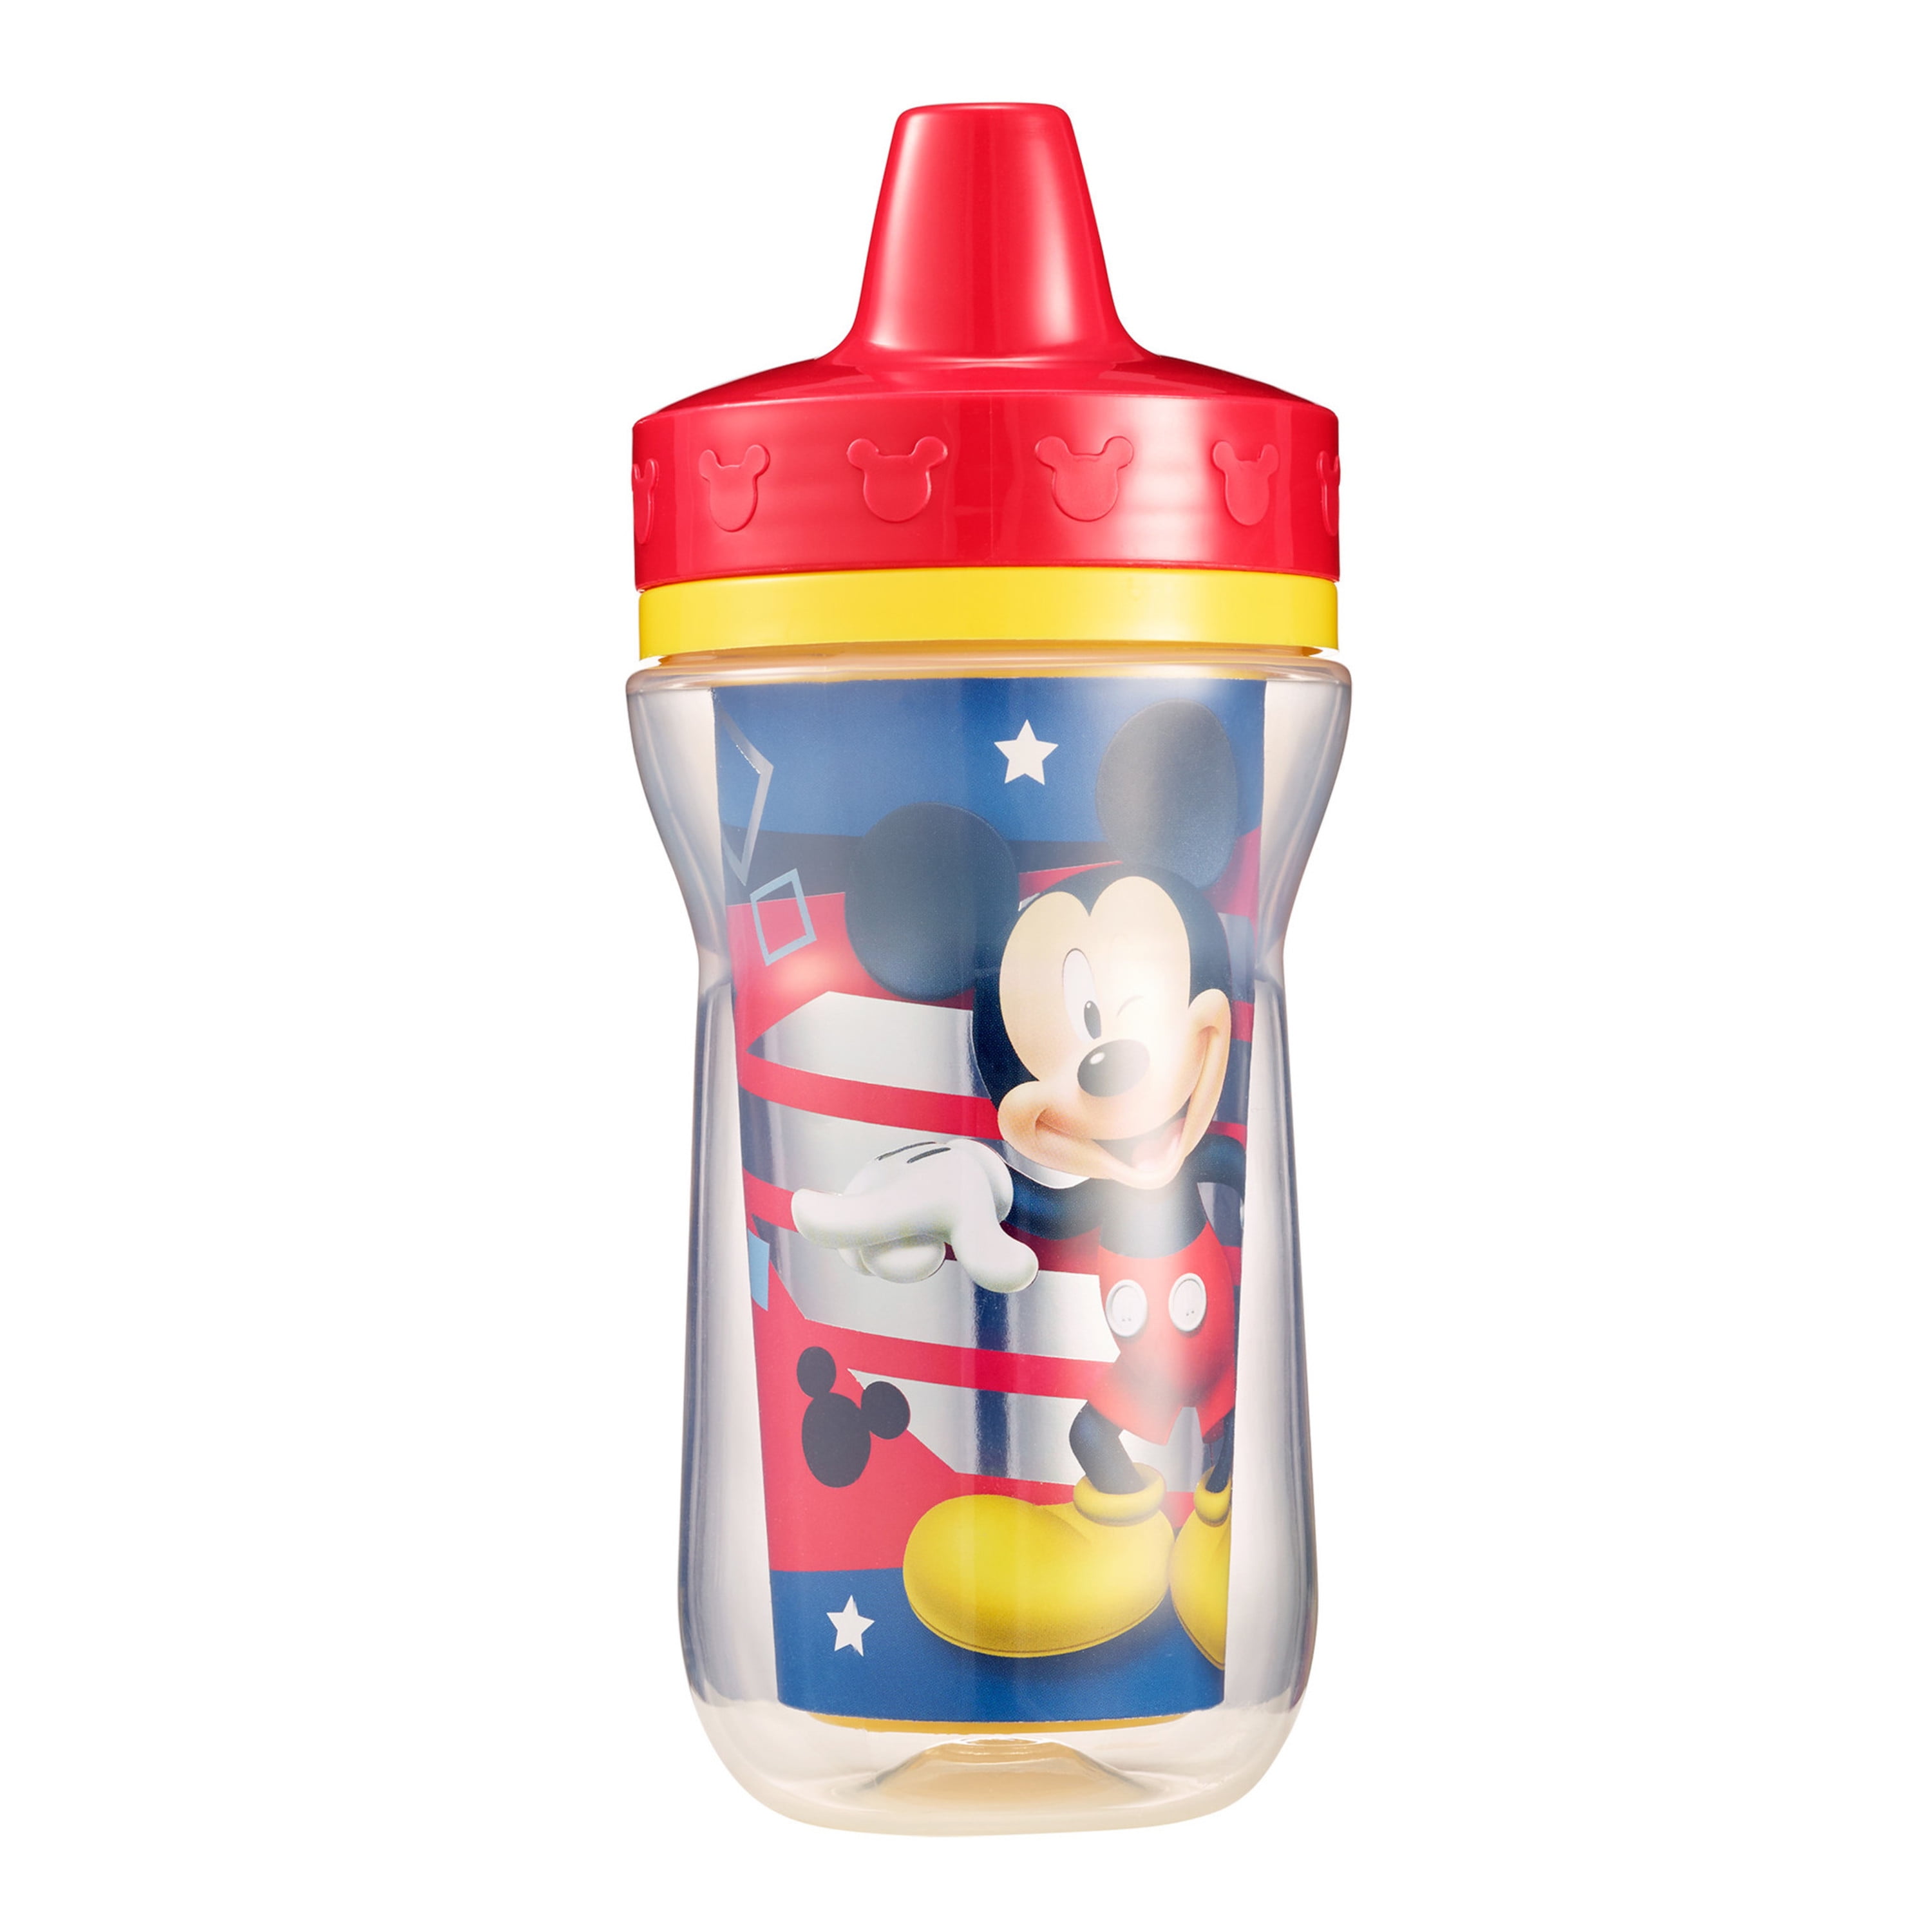 Disney Mickey Mouse Sippy Cup Set for Kids - Bundle with 2 Spill-Proof,  Leak-Proof, Insulated Sippy …See more Disney Mickey Mouse Sippy Cup Set for